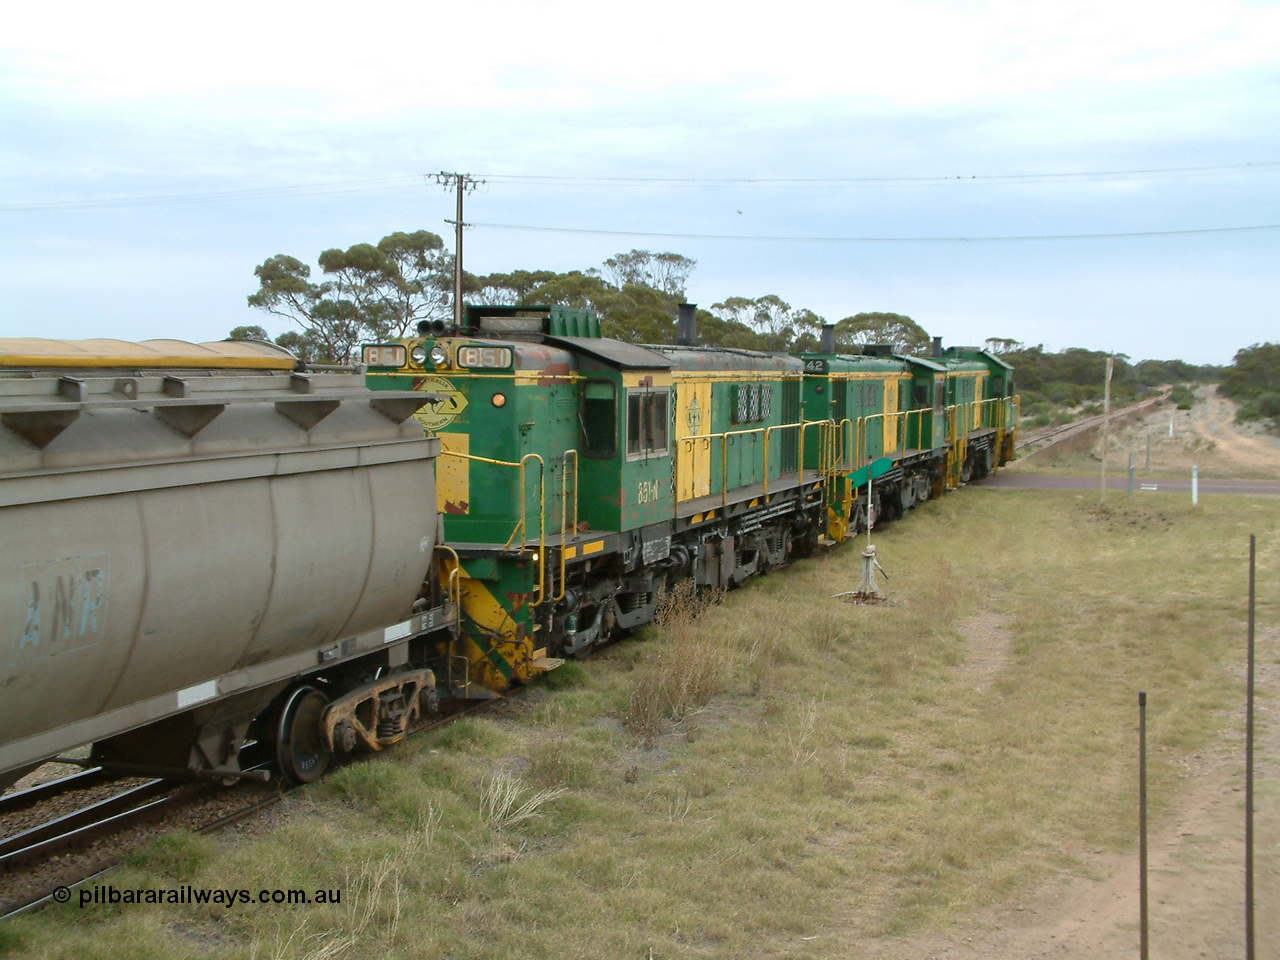 030407 100506
Minnipa, north bound empty grain train shunts across the grade crossing for Minnipa - Yardea Rd behind a trio of former Australian National Co-Co locomotives with rebuilt former AE Goodwin ALCo model DL531 830 class ex 839, serial no. 83730, rebuilt by Port Augusta Workshops to DA class, leading two AE Goodwin ALCo model DL531 830 class units 842, serial no. 84140 and 851 serial no. 84137, 851 having been on the Eyre Peninsula since delivered in 1962, to shunt off empty waggons into the grain siding. 7th April, 2003.
Keywords: 830-class;851;84137;AE-Goodwin;ALCo;DL531;